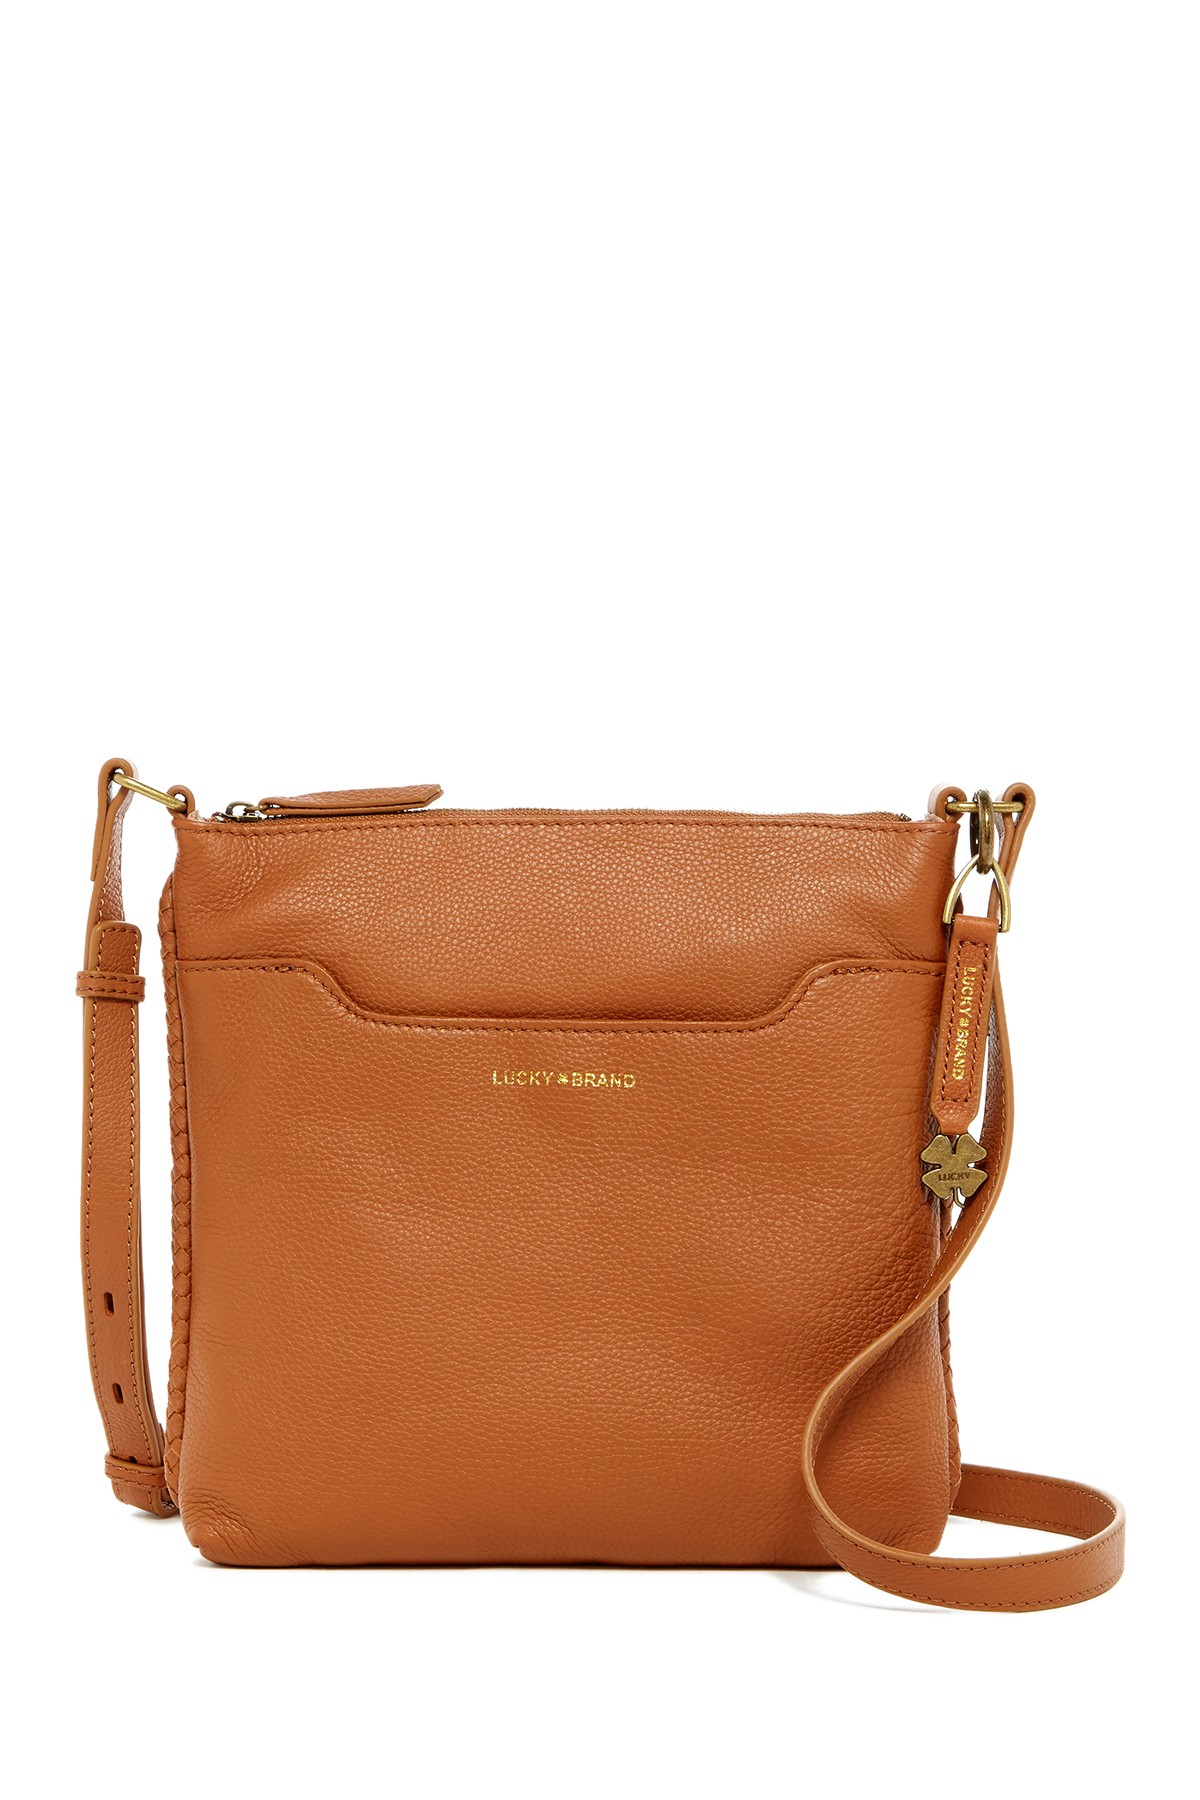 Lucky Brand Ali Leather Crossbody in Tobacco (Brown) - Lyst